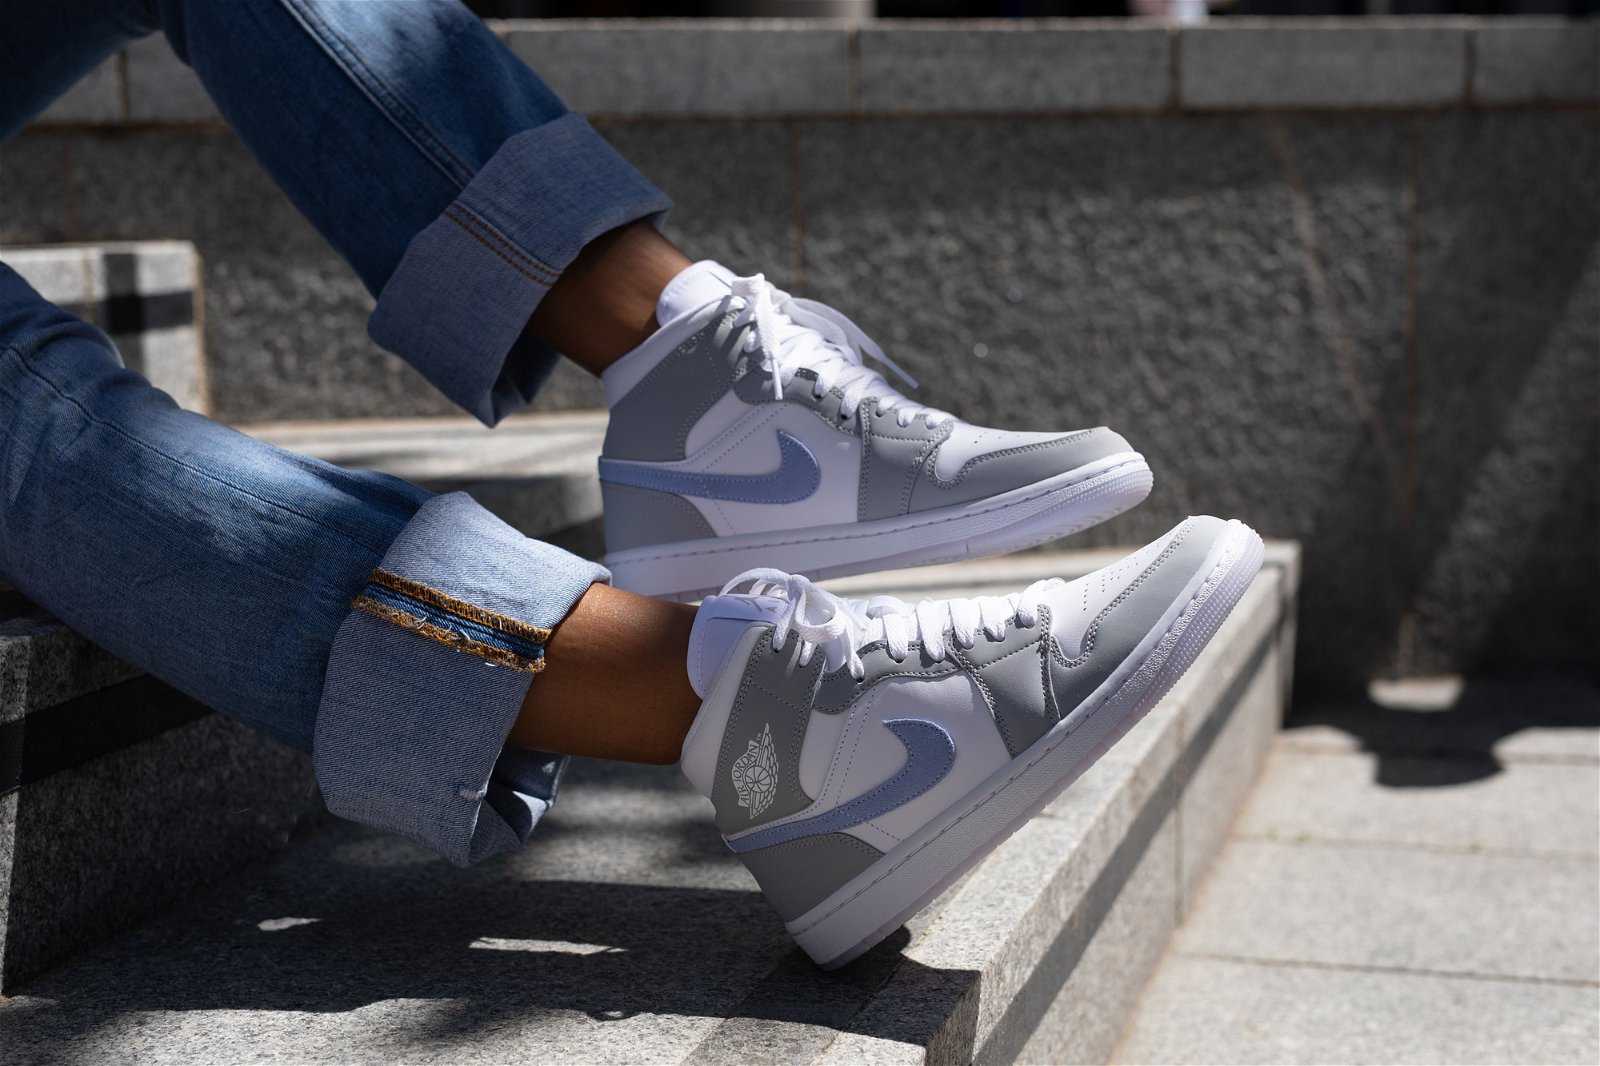 Aj1 Low White Wolf Greylimited Special Sales And Special Offers Women S Men S Sneakers Sports Shoes Shop Athletic Shoes Online Off 50 Free Shipping Fast Shippment